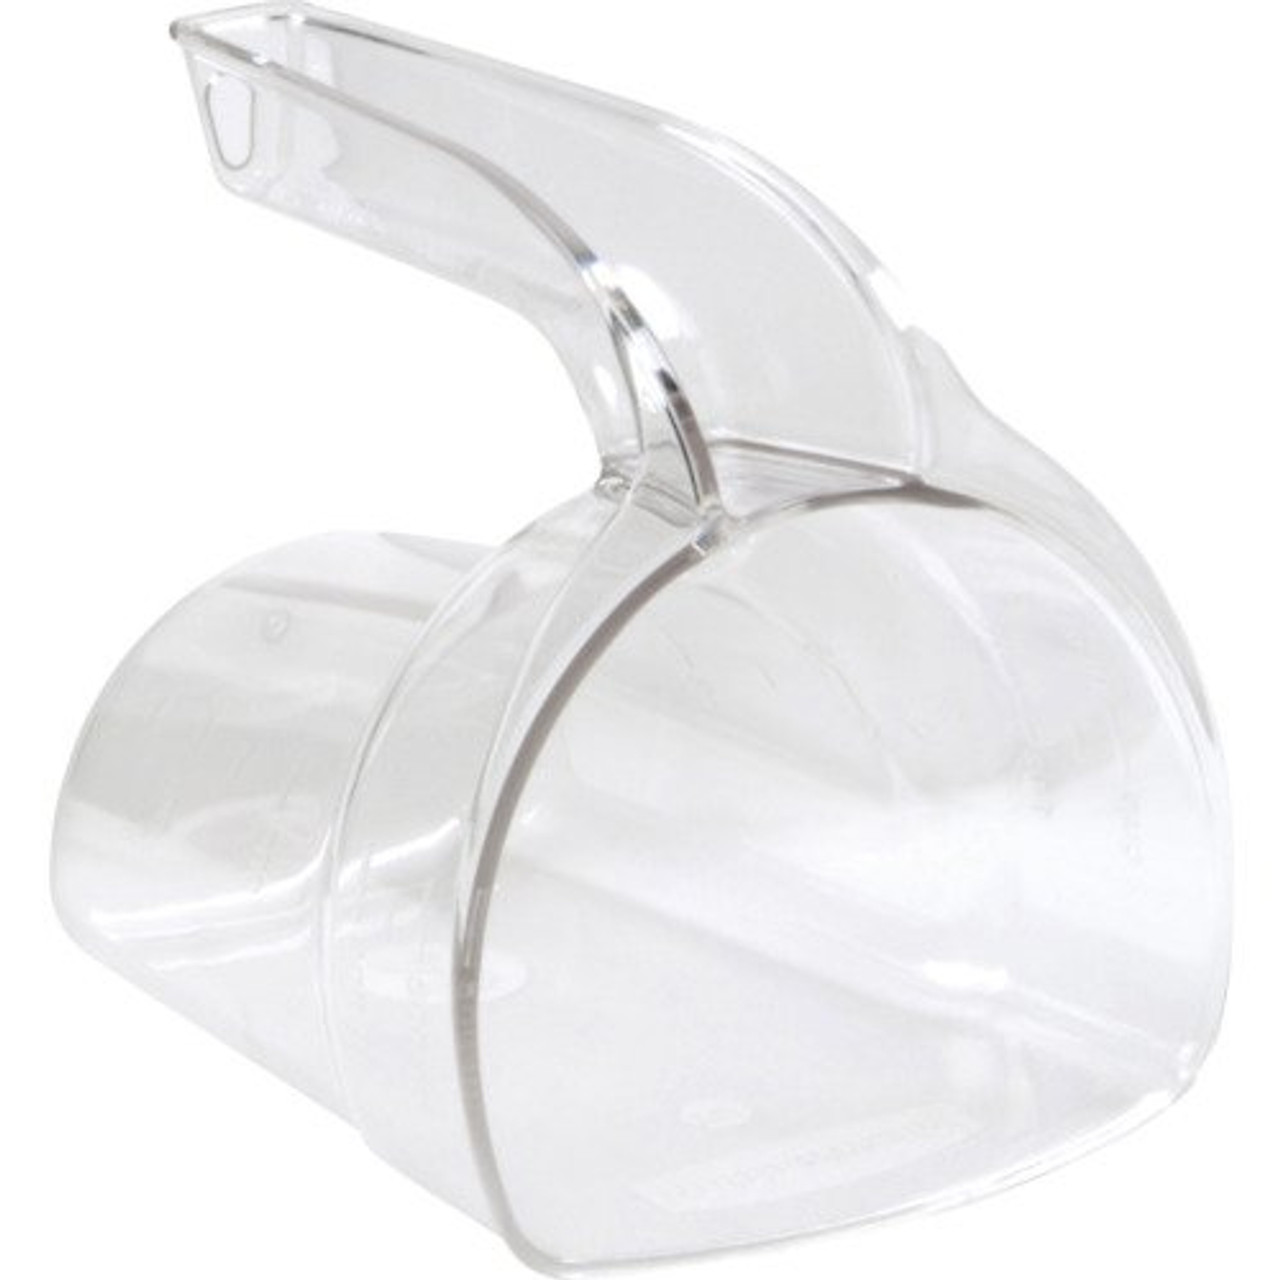 Rubbermaid Portion Control Scoop - 2 Cup - Clear